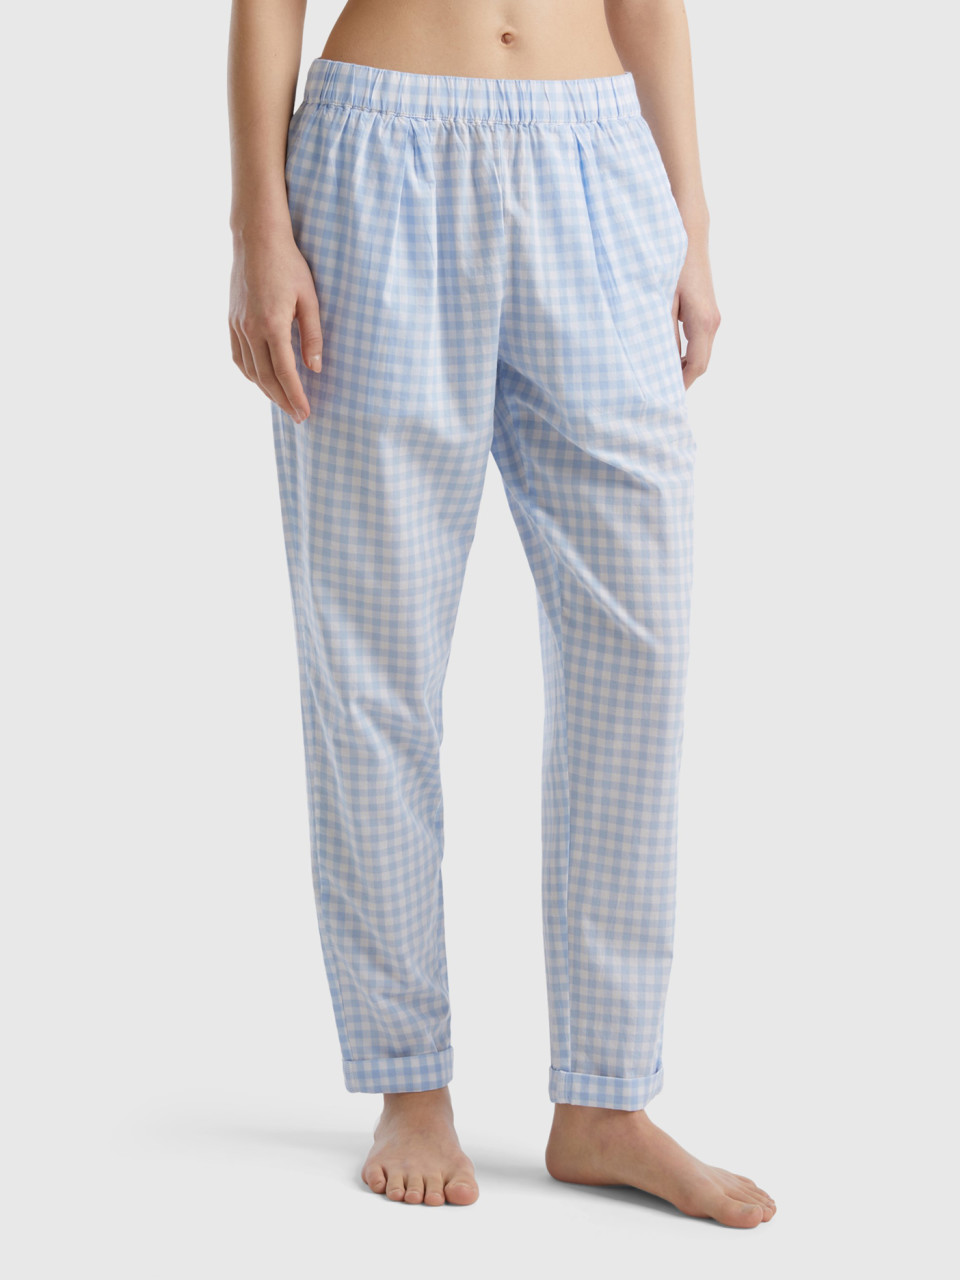 Benetton, Trousers With Vichy Check Pattern, Sky Blue, Women